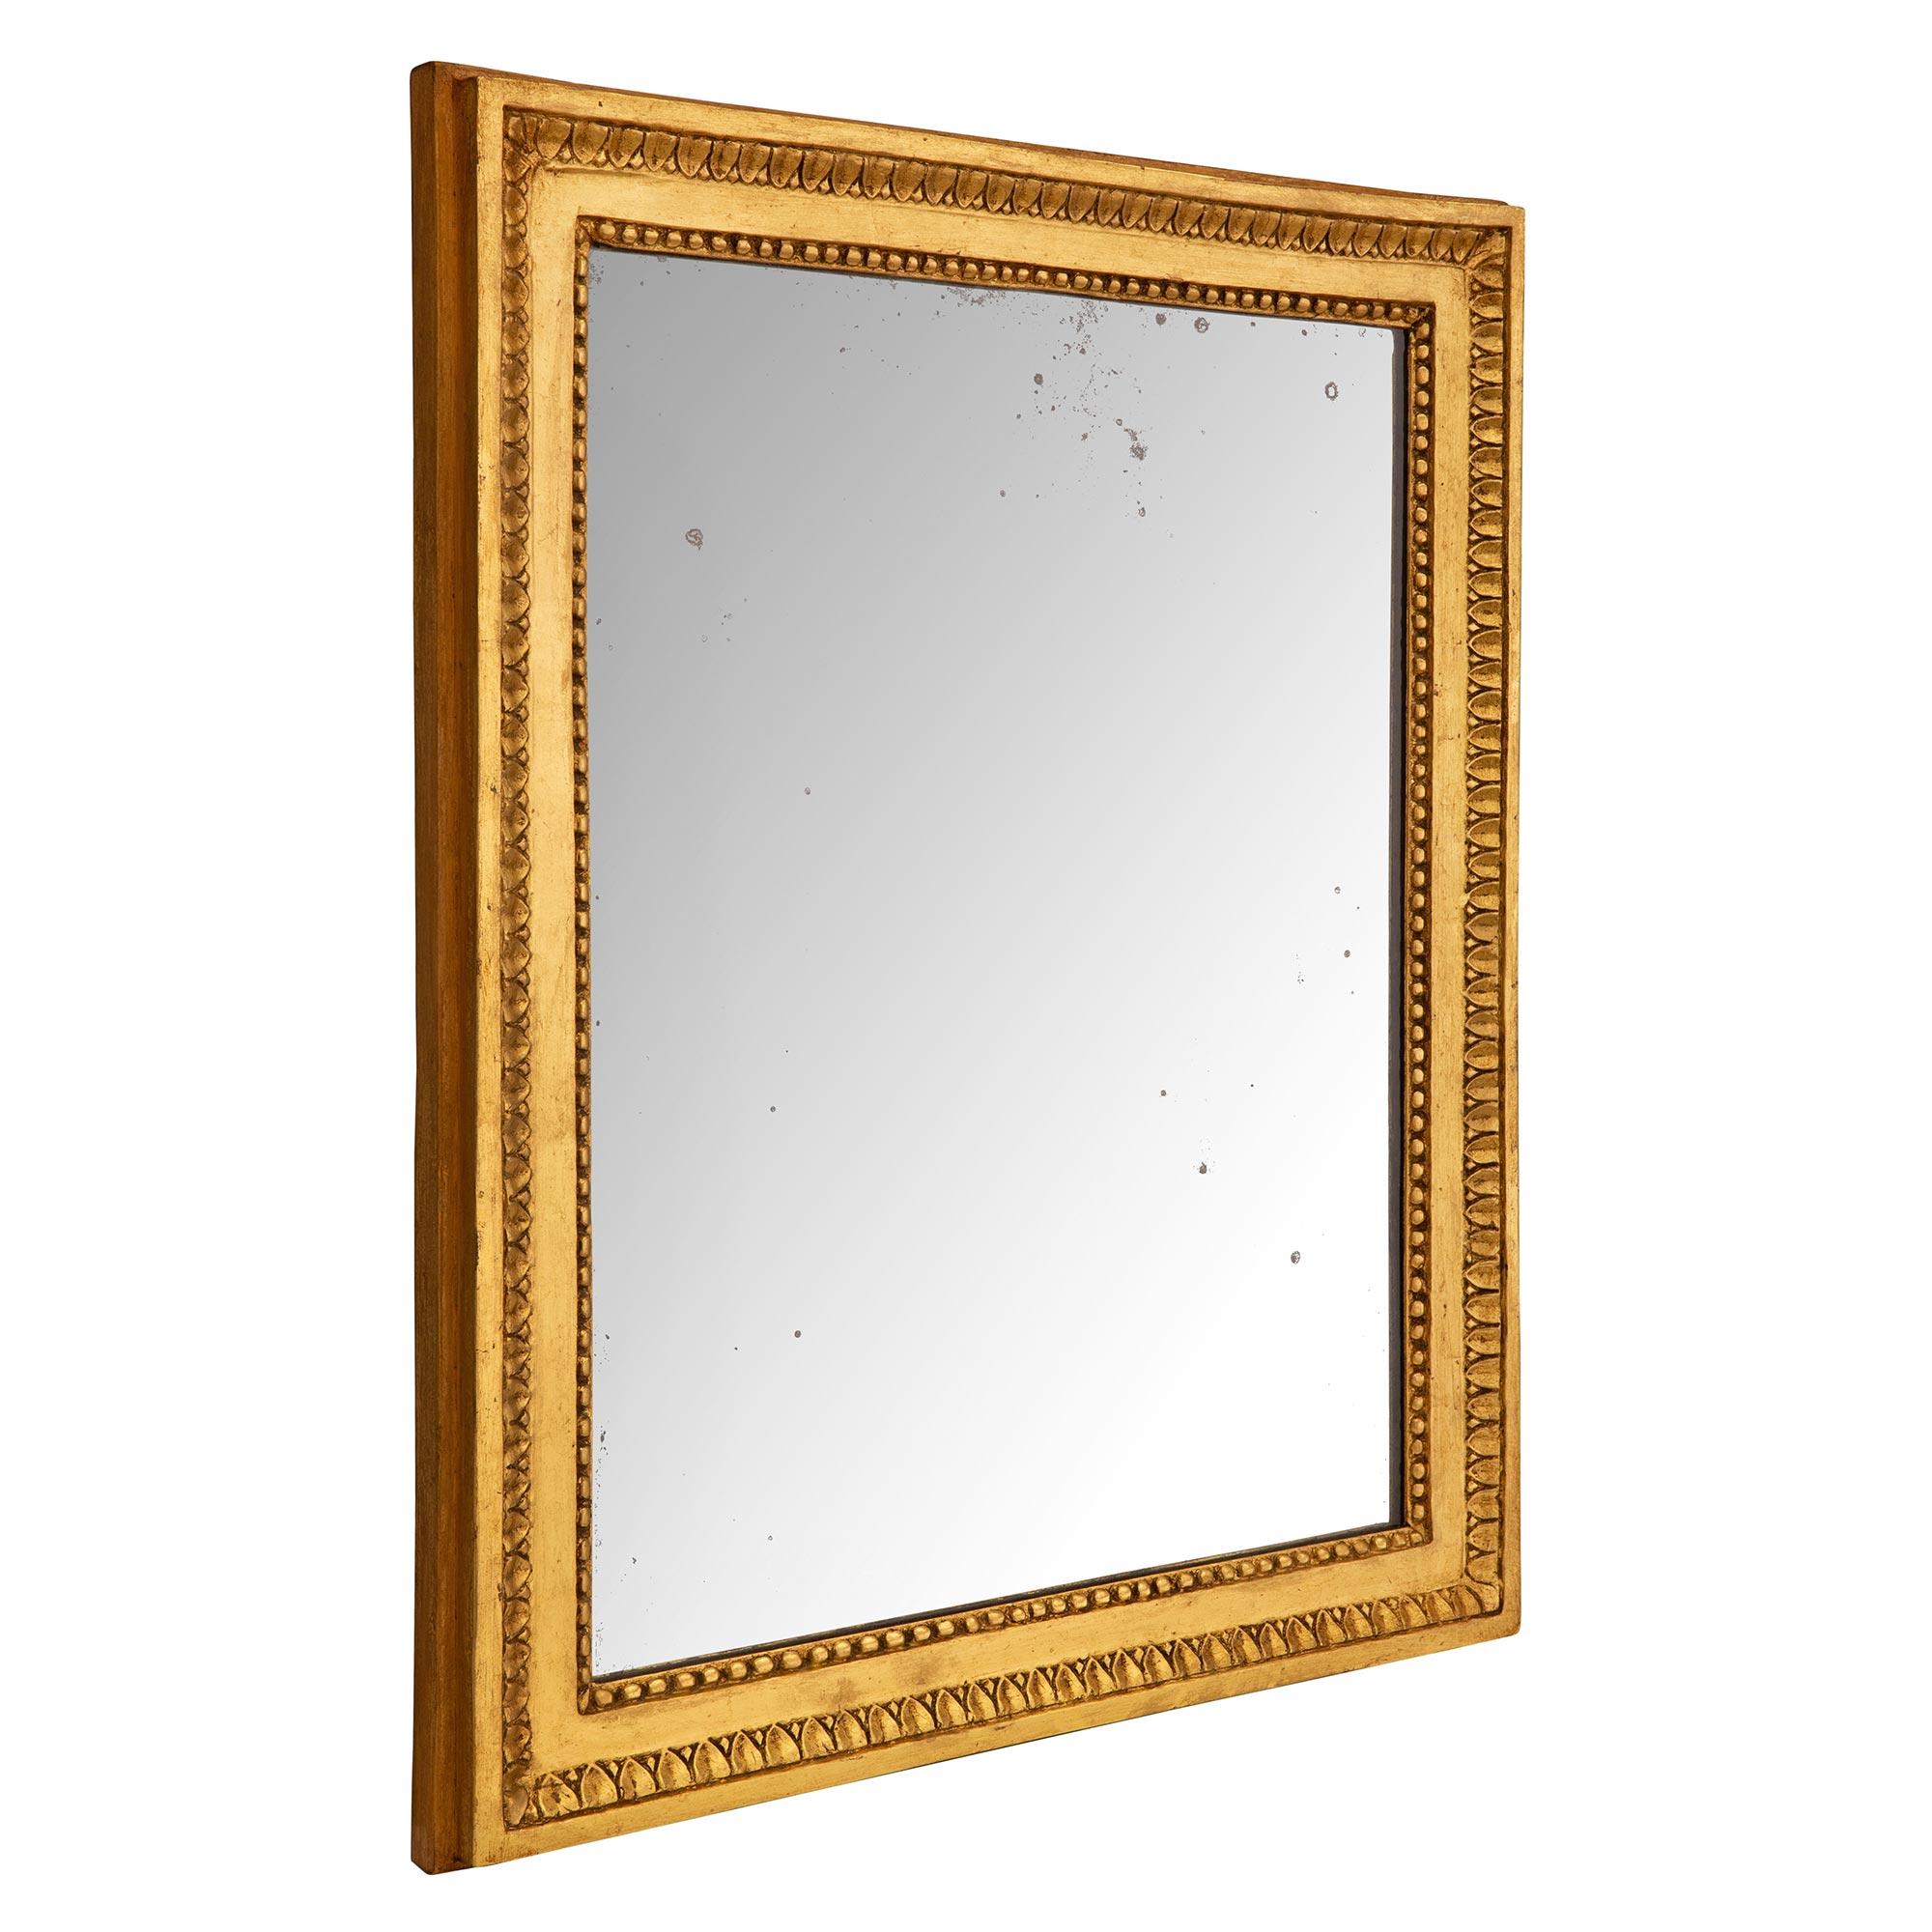 A most elegant French 18th century Louis XVI period giltwood mirror. The mirror retains its original mirror plate set within the beautiful mottled giltwood frame with a fine beaded border and a richly carved foliate wrap around band. Can be